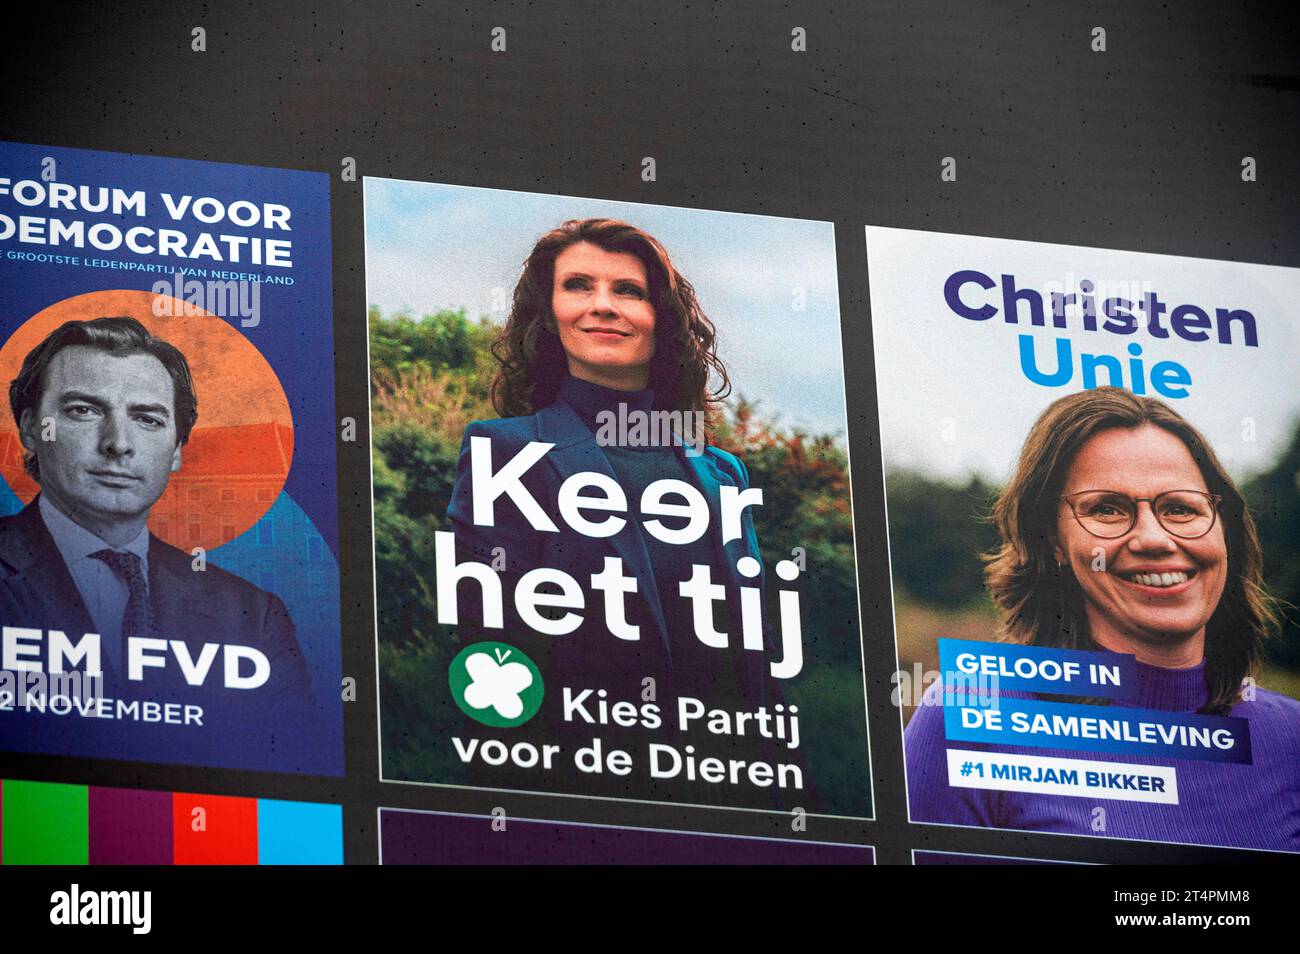 Amsterdam The Netherlands 1st November 2023. Party political posters of the parties taking part in the upcoming Dutch Parliamentary elections. On November 22nd the Dutch heads to the polls to vote for the second chamber of parliament. Poster Keer het tij, Kies Partij voor de Dieren - Turns the tide Choose Partij voor de Dieren with image of leader Esther Ouwehand. Pvdd verkiezing, verkiezingen, 2de, tweede, kamer, poster, posters, partij, Stock Photo